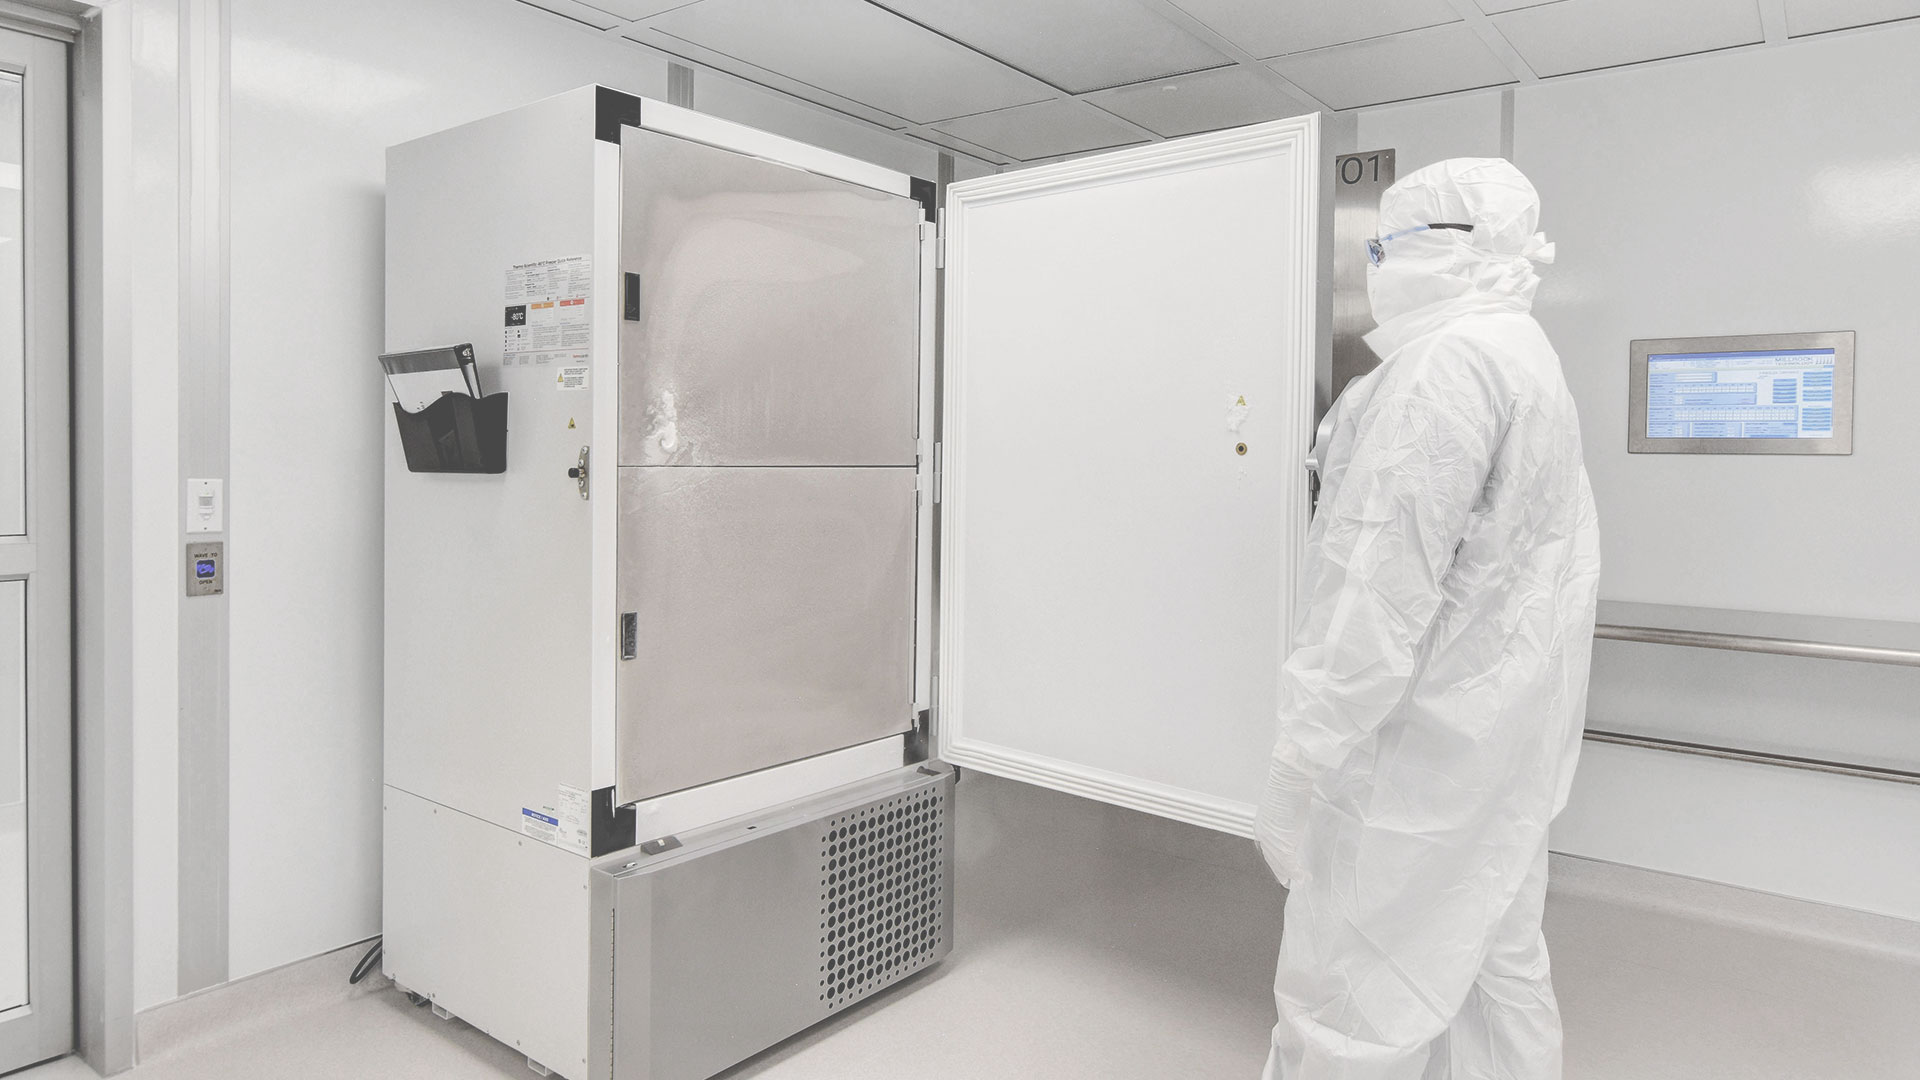 Cleanroom Supplier Clean room by Allied Cleanrooms - USP 797, and ISO 4, ISO 5, ISO 6, ISO 7, and IS0 8, cGMP cleanroom manufacturing, soft wall cleanrooms FED-STD-209E and ISO 14644-1, control contamination